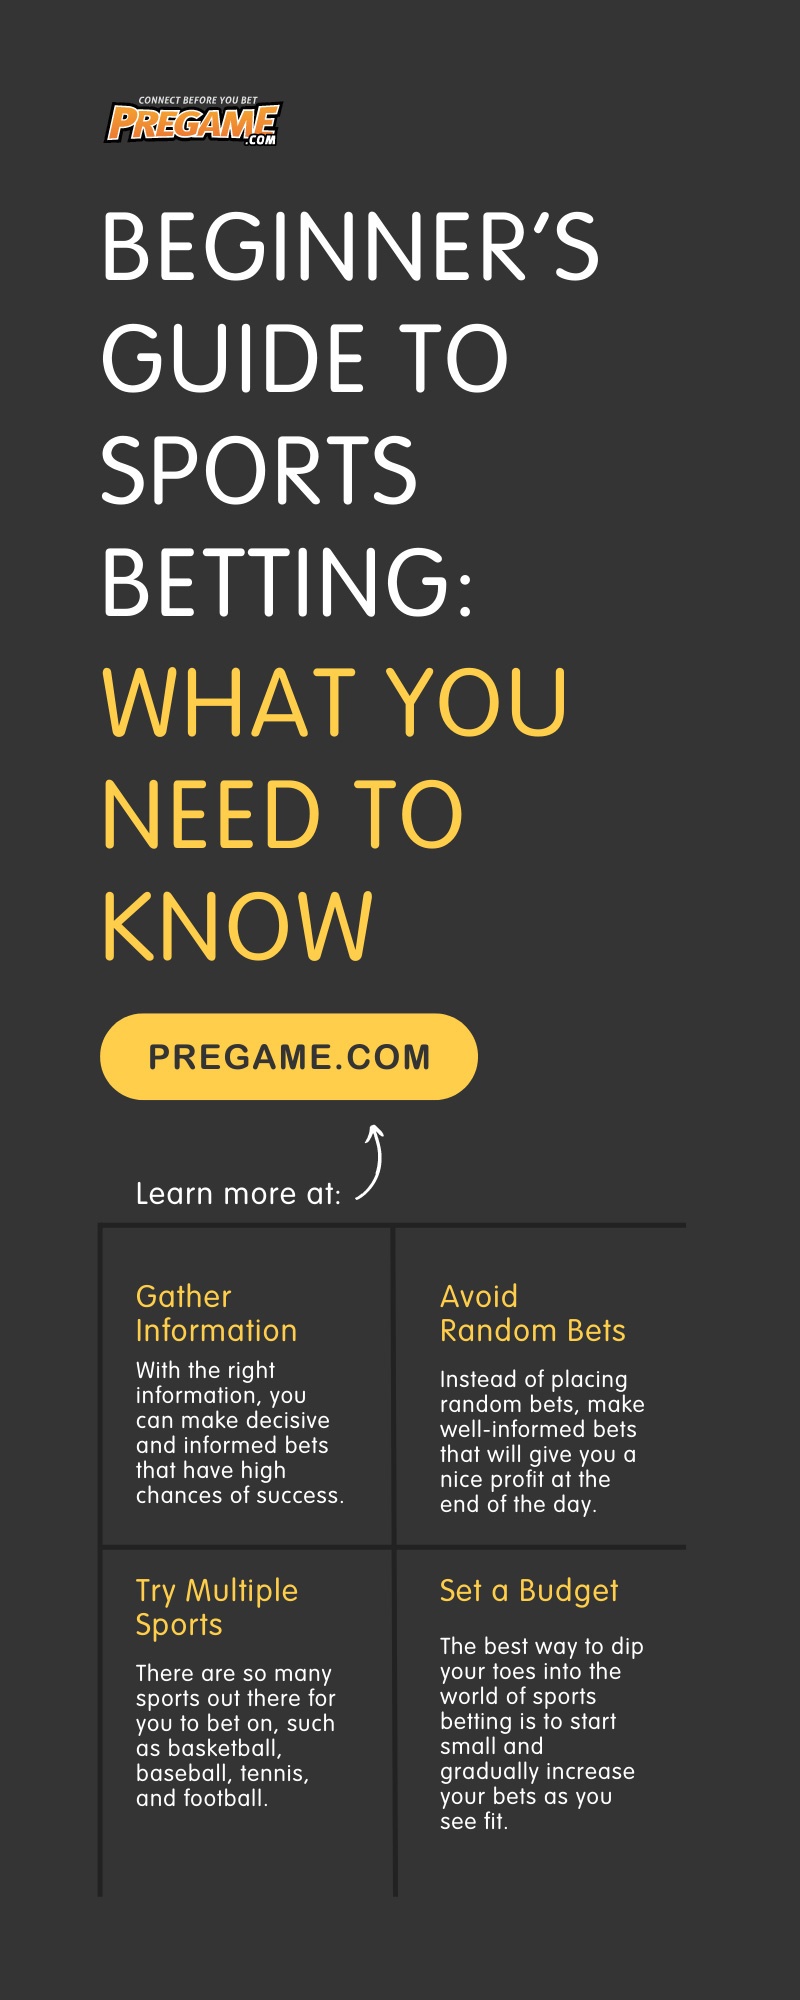 Beginner’s Guide To Sports Betting: What You Need To Know